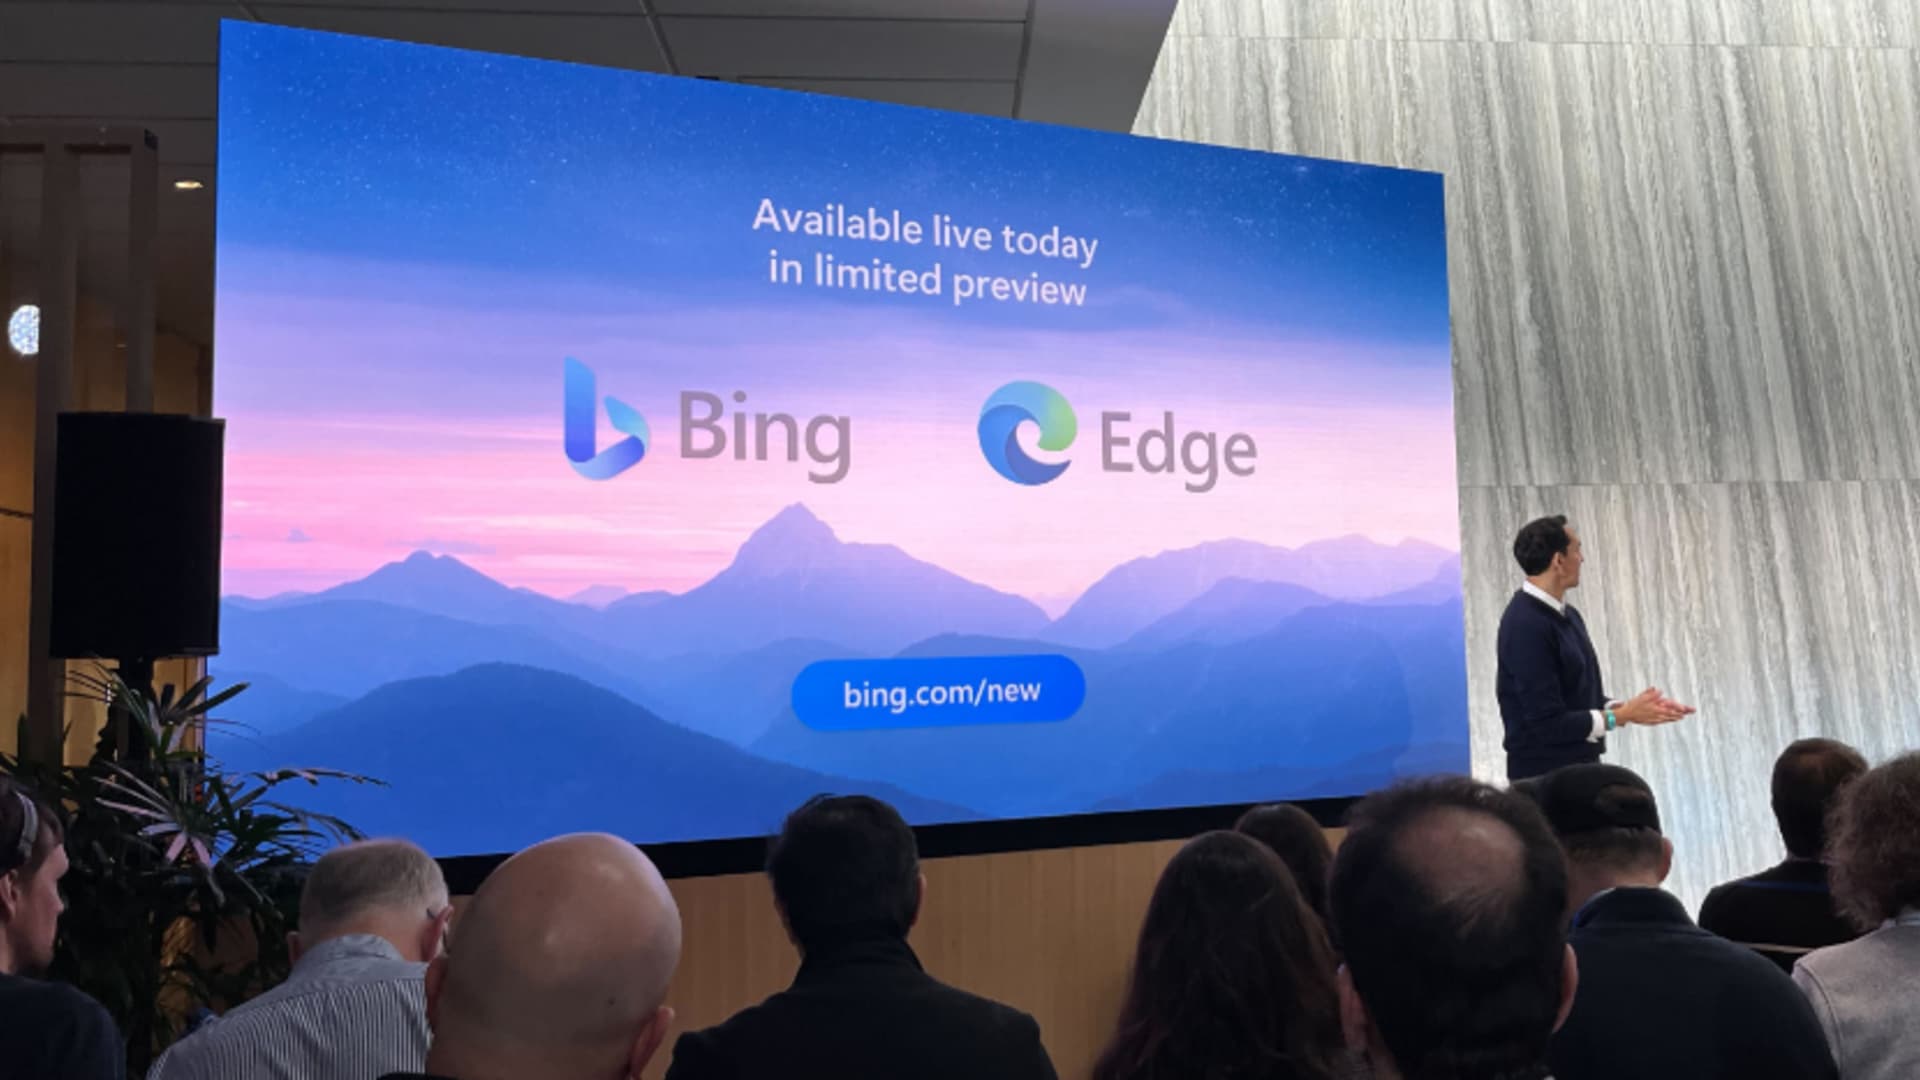 Microsoft's new versions of Bing and Edge are available to try beginning Tuesday.